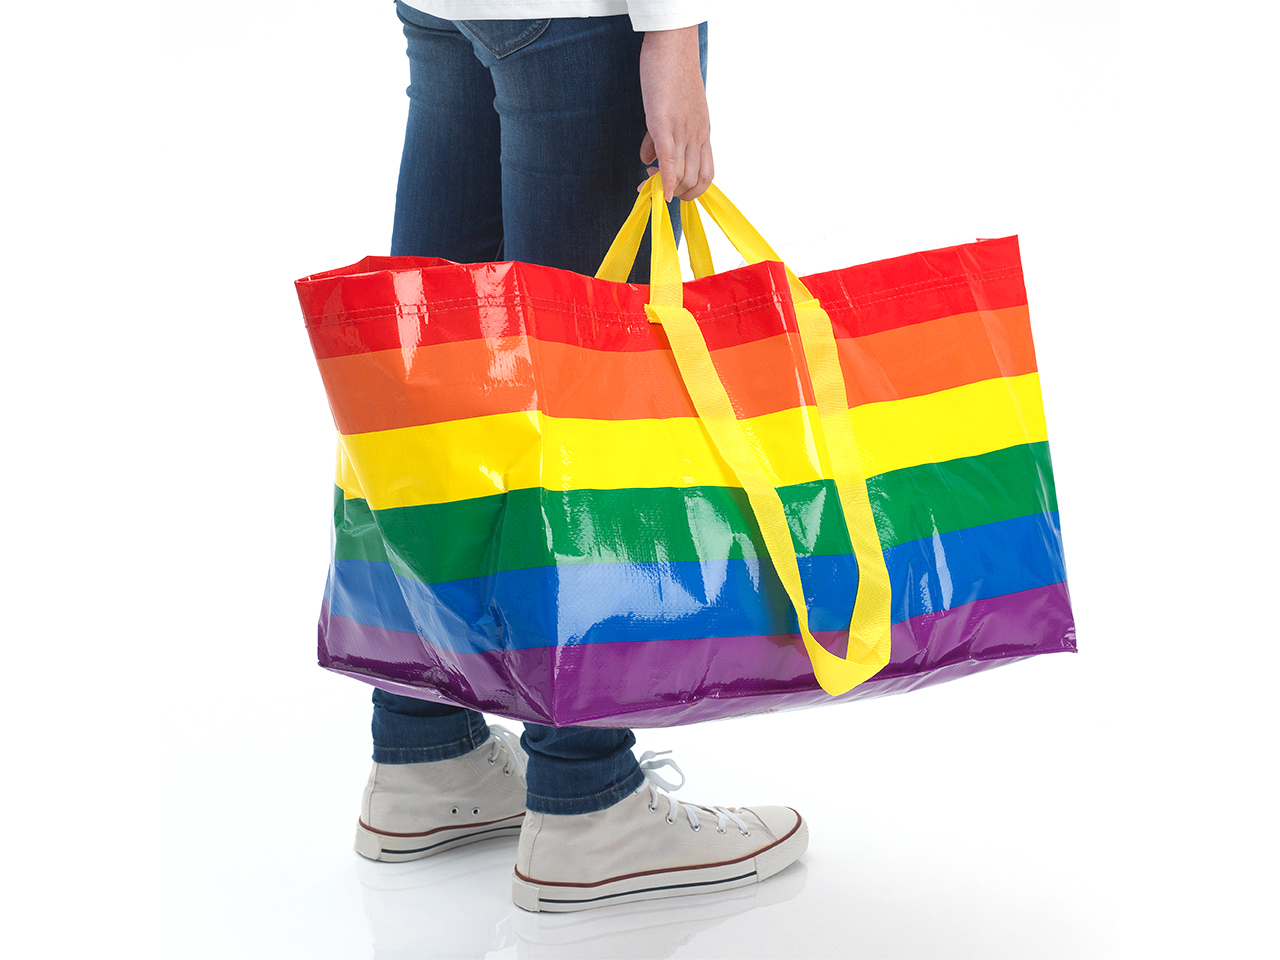 ways your family can rock the rainbow at pride this month 1280x960 IKEAbag